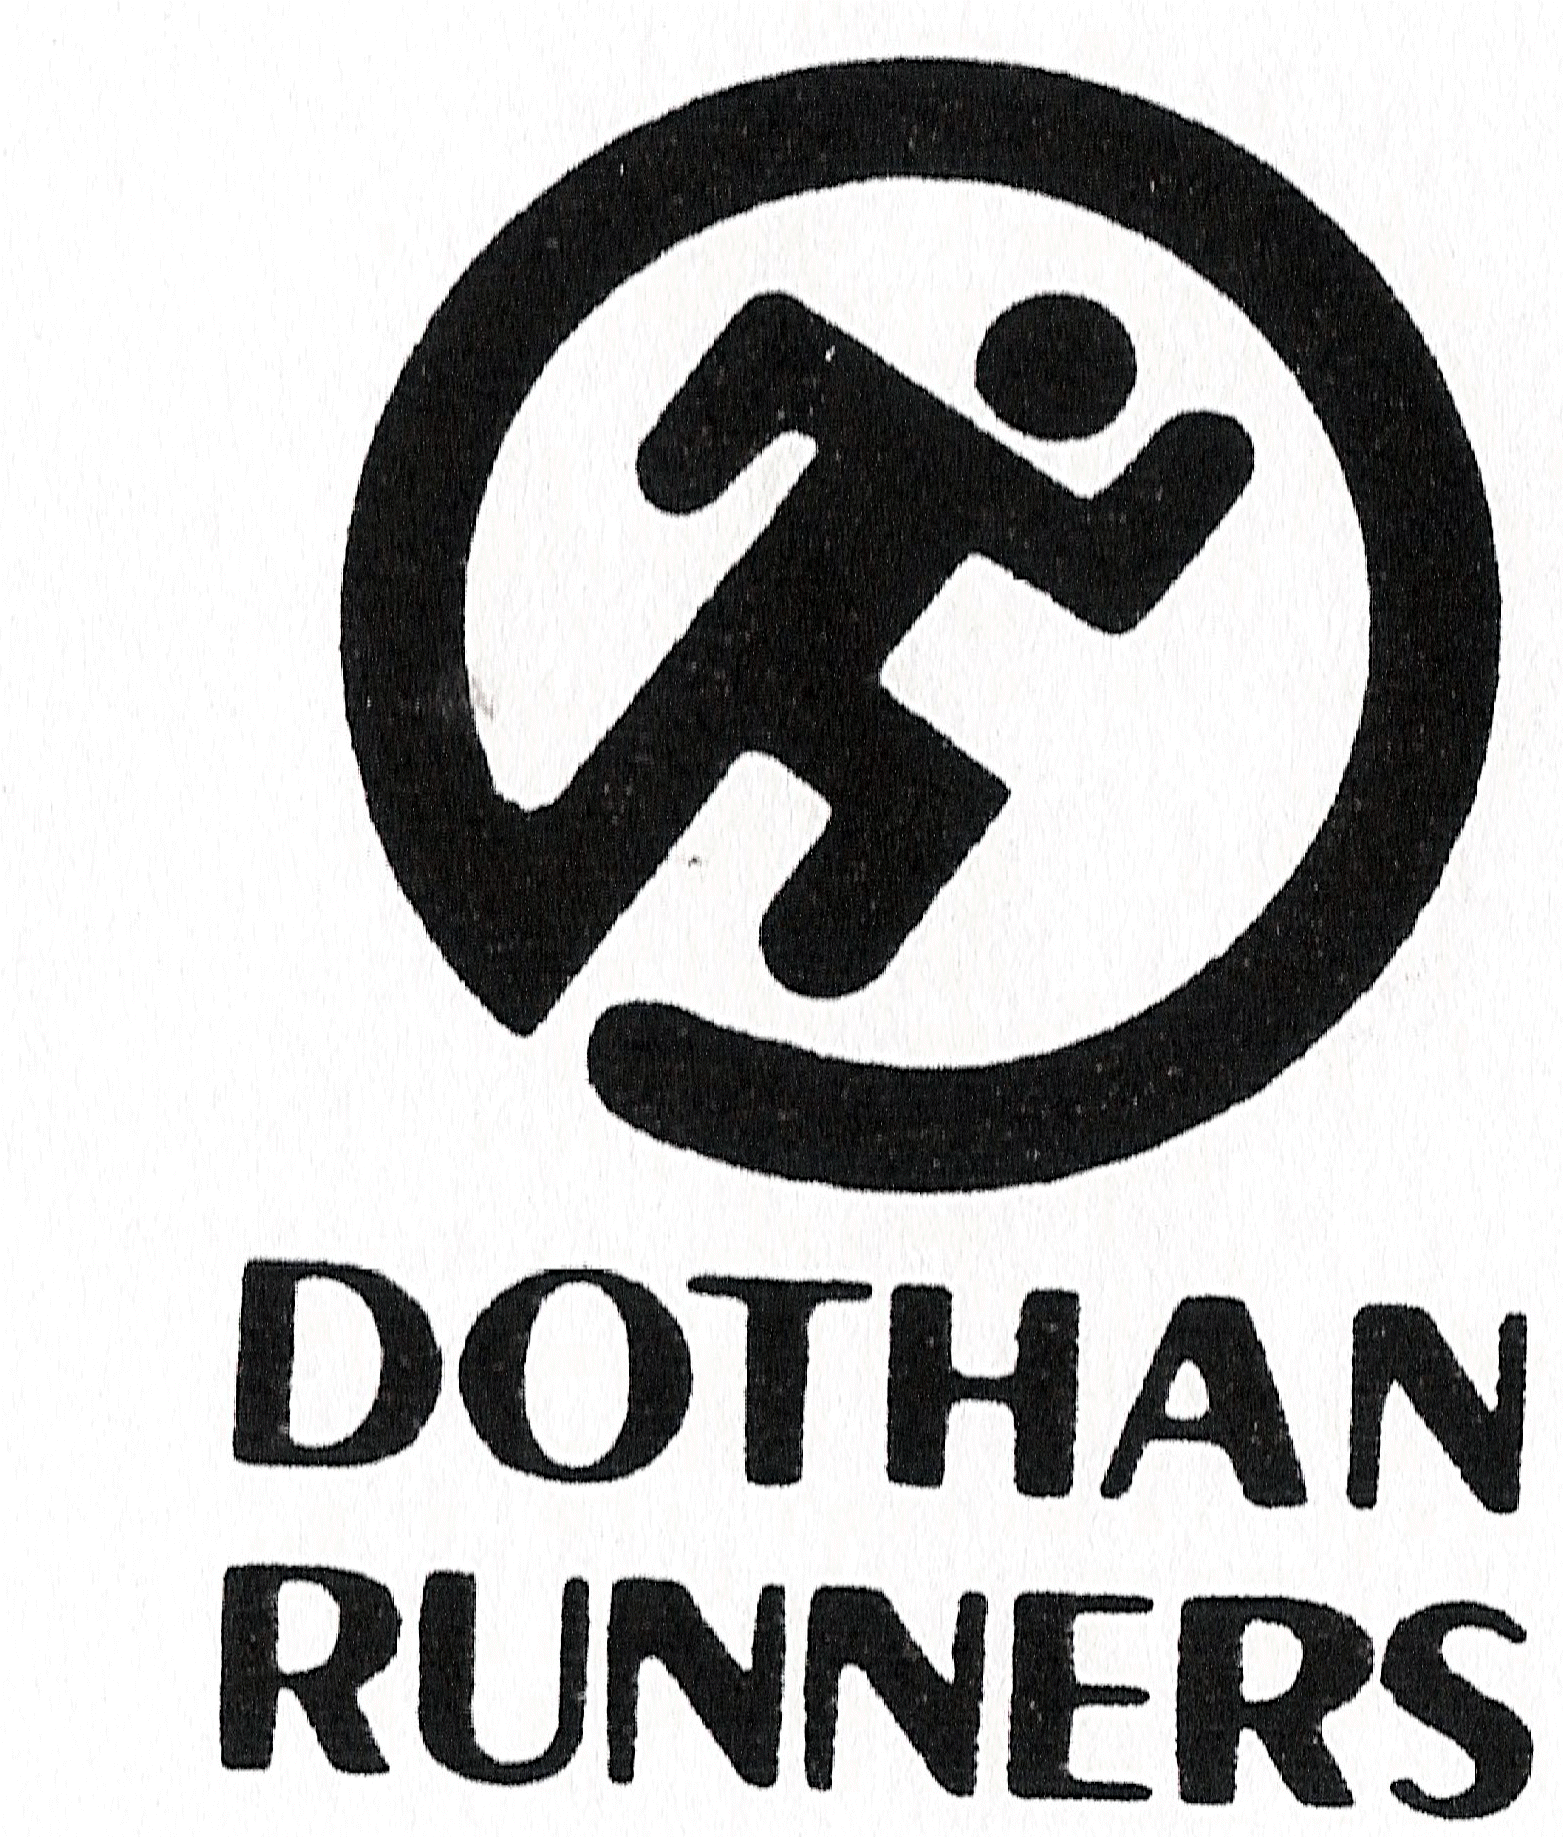 DOTHAN RUNNERS WEB SITE OF THE DOTHAN RUNNERS CLUB